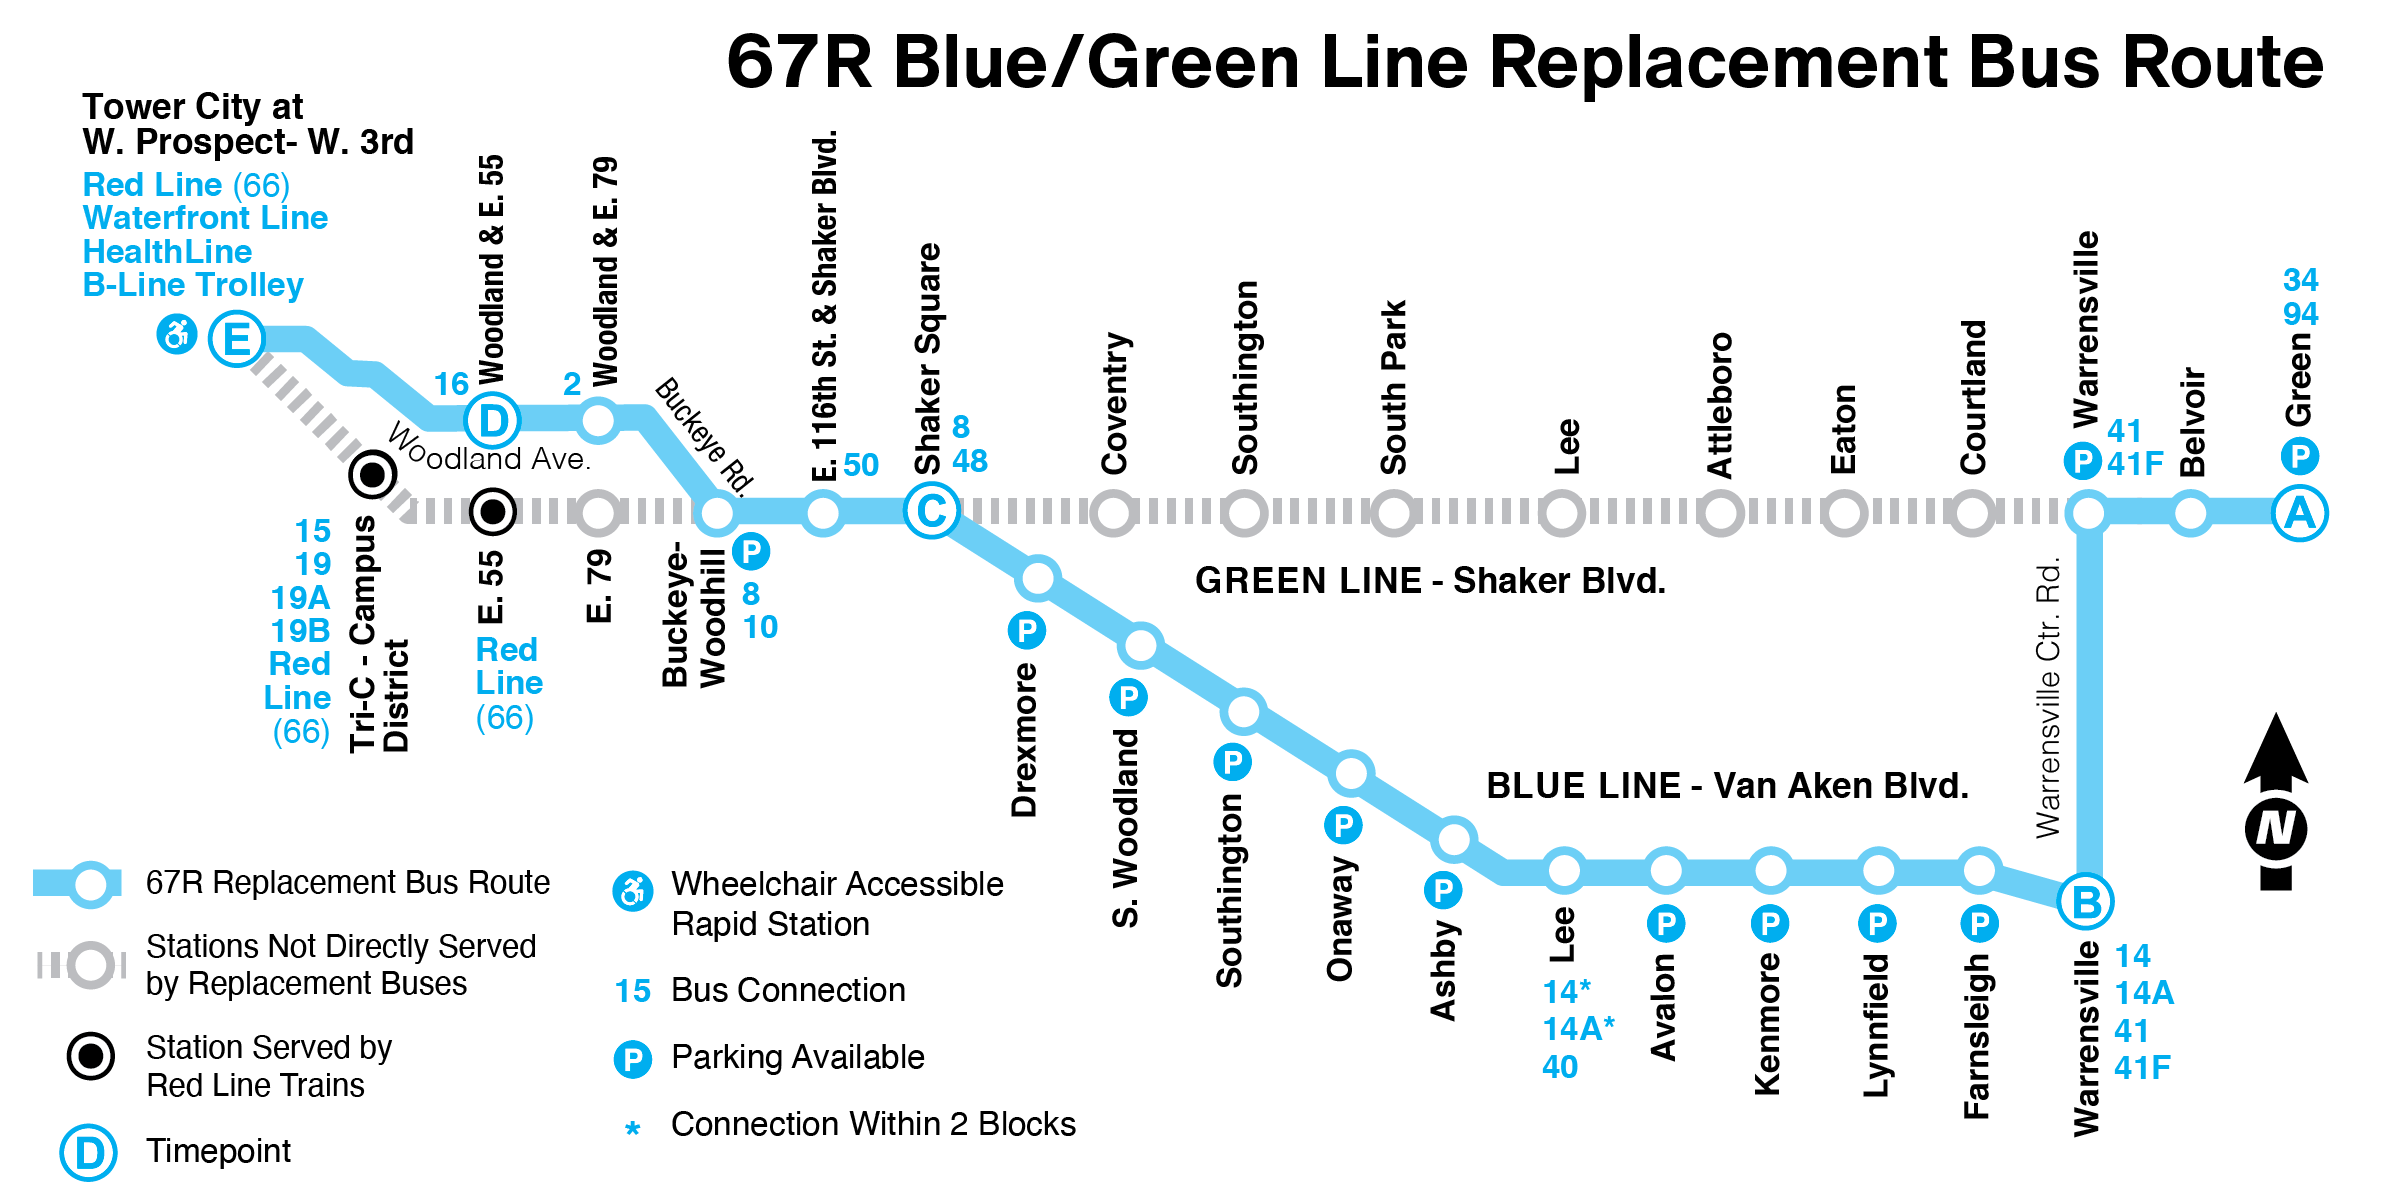 Blue & Green Line rail service east of Tower City will be replaced with 67R buses 